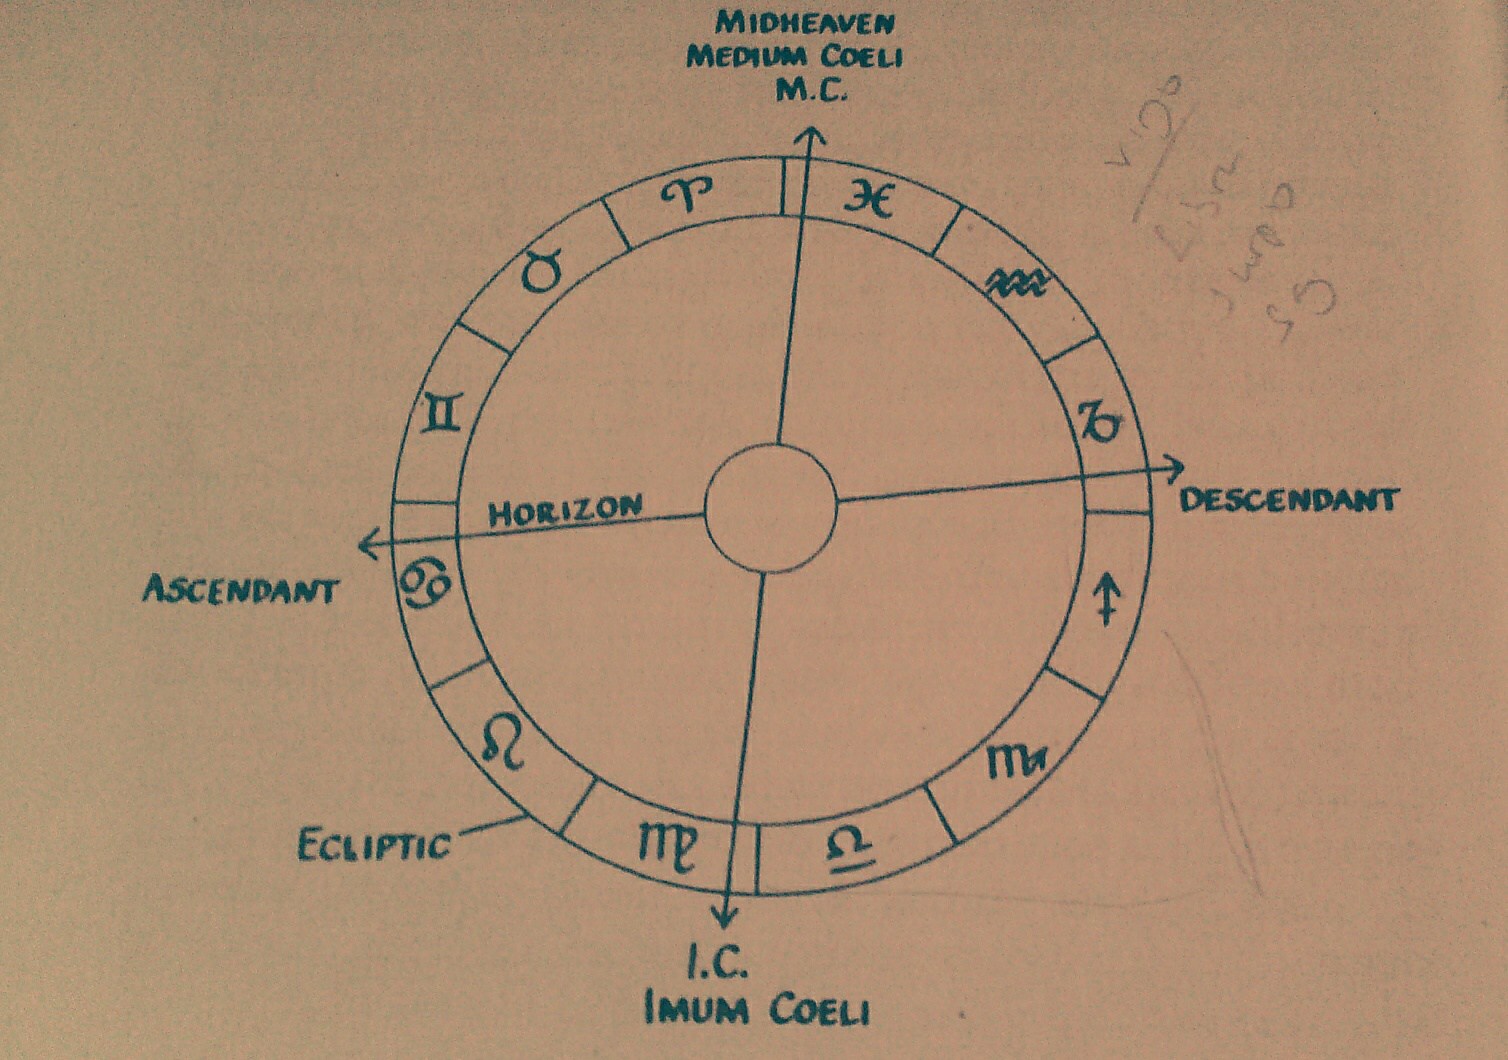 Draconic Chart Meaning